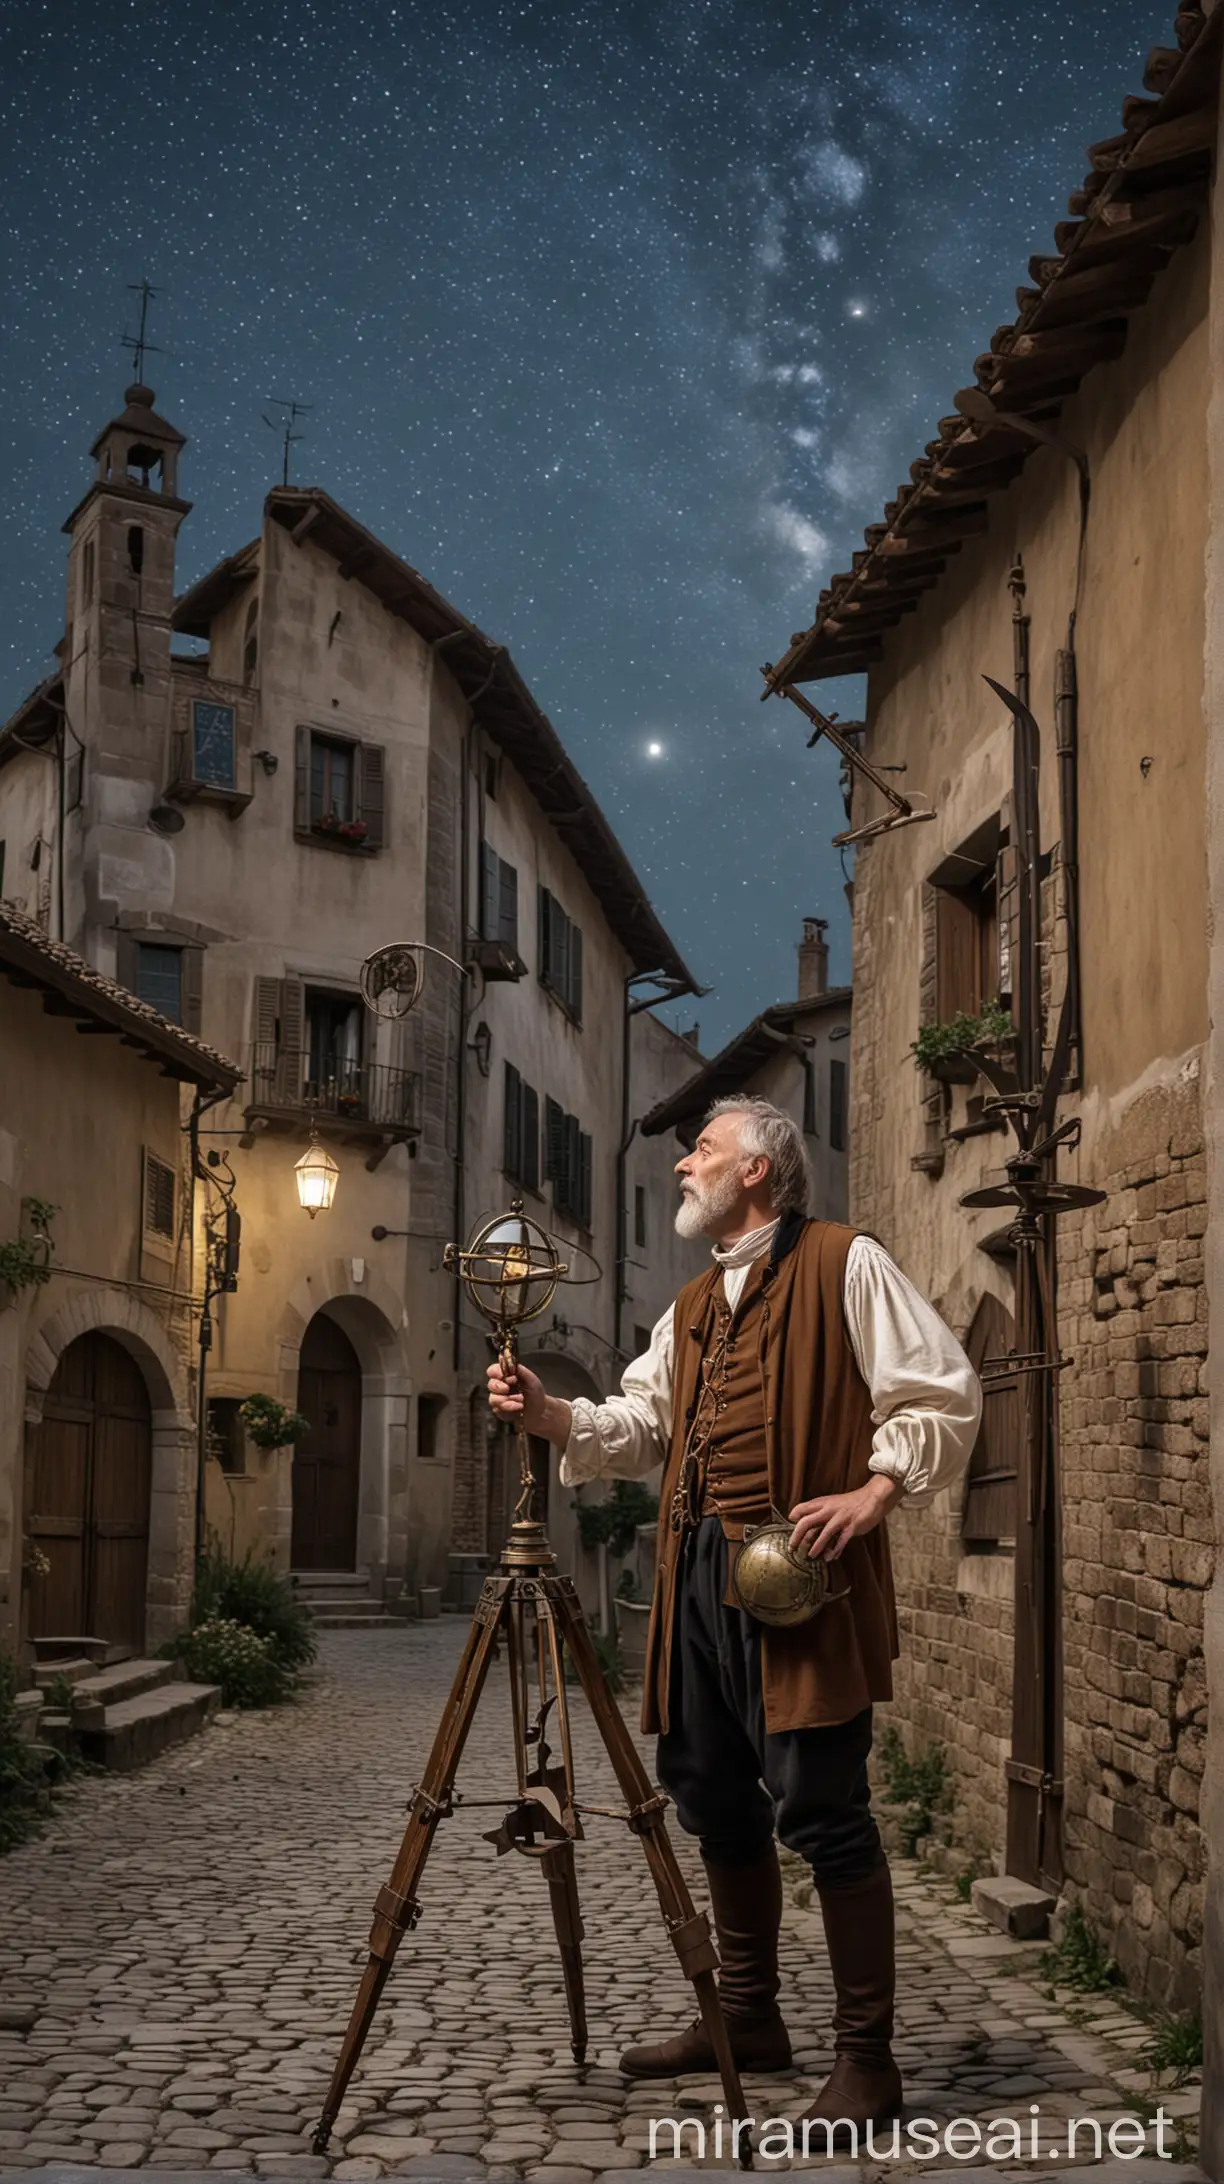 16th Century Astronomer with Sextant in Old Italian Village